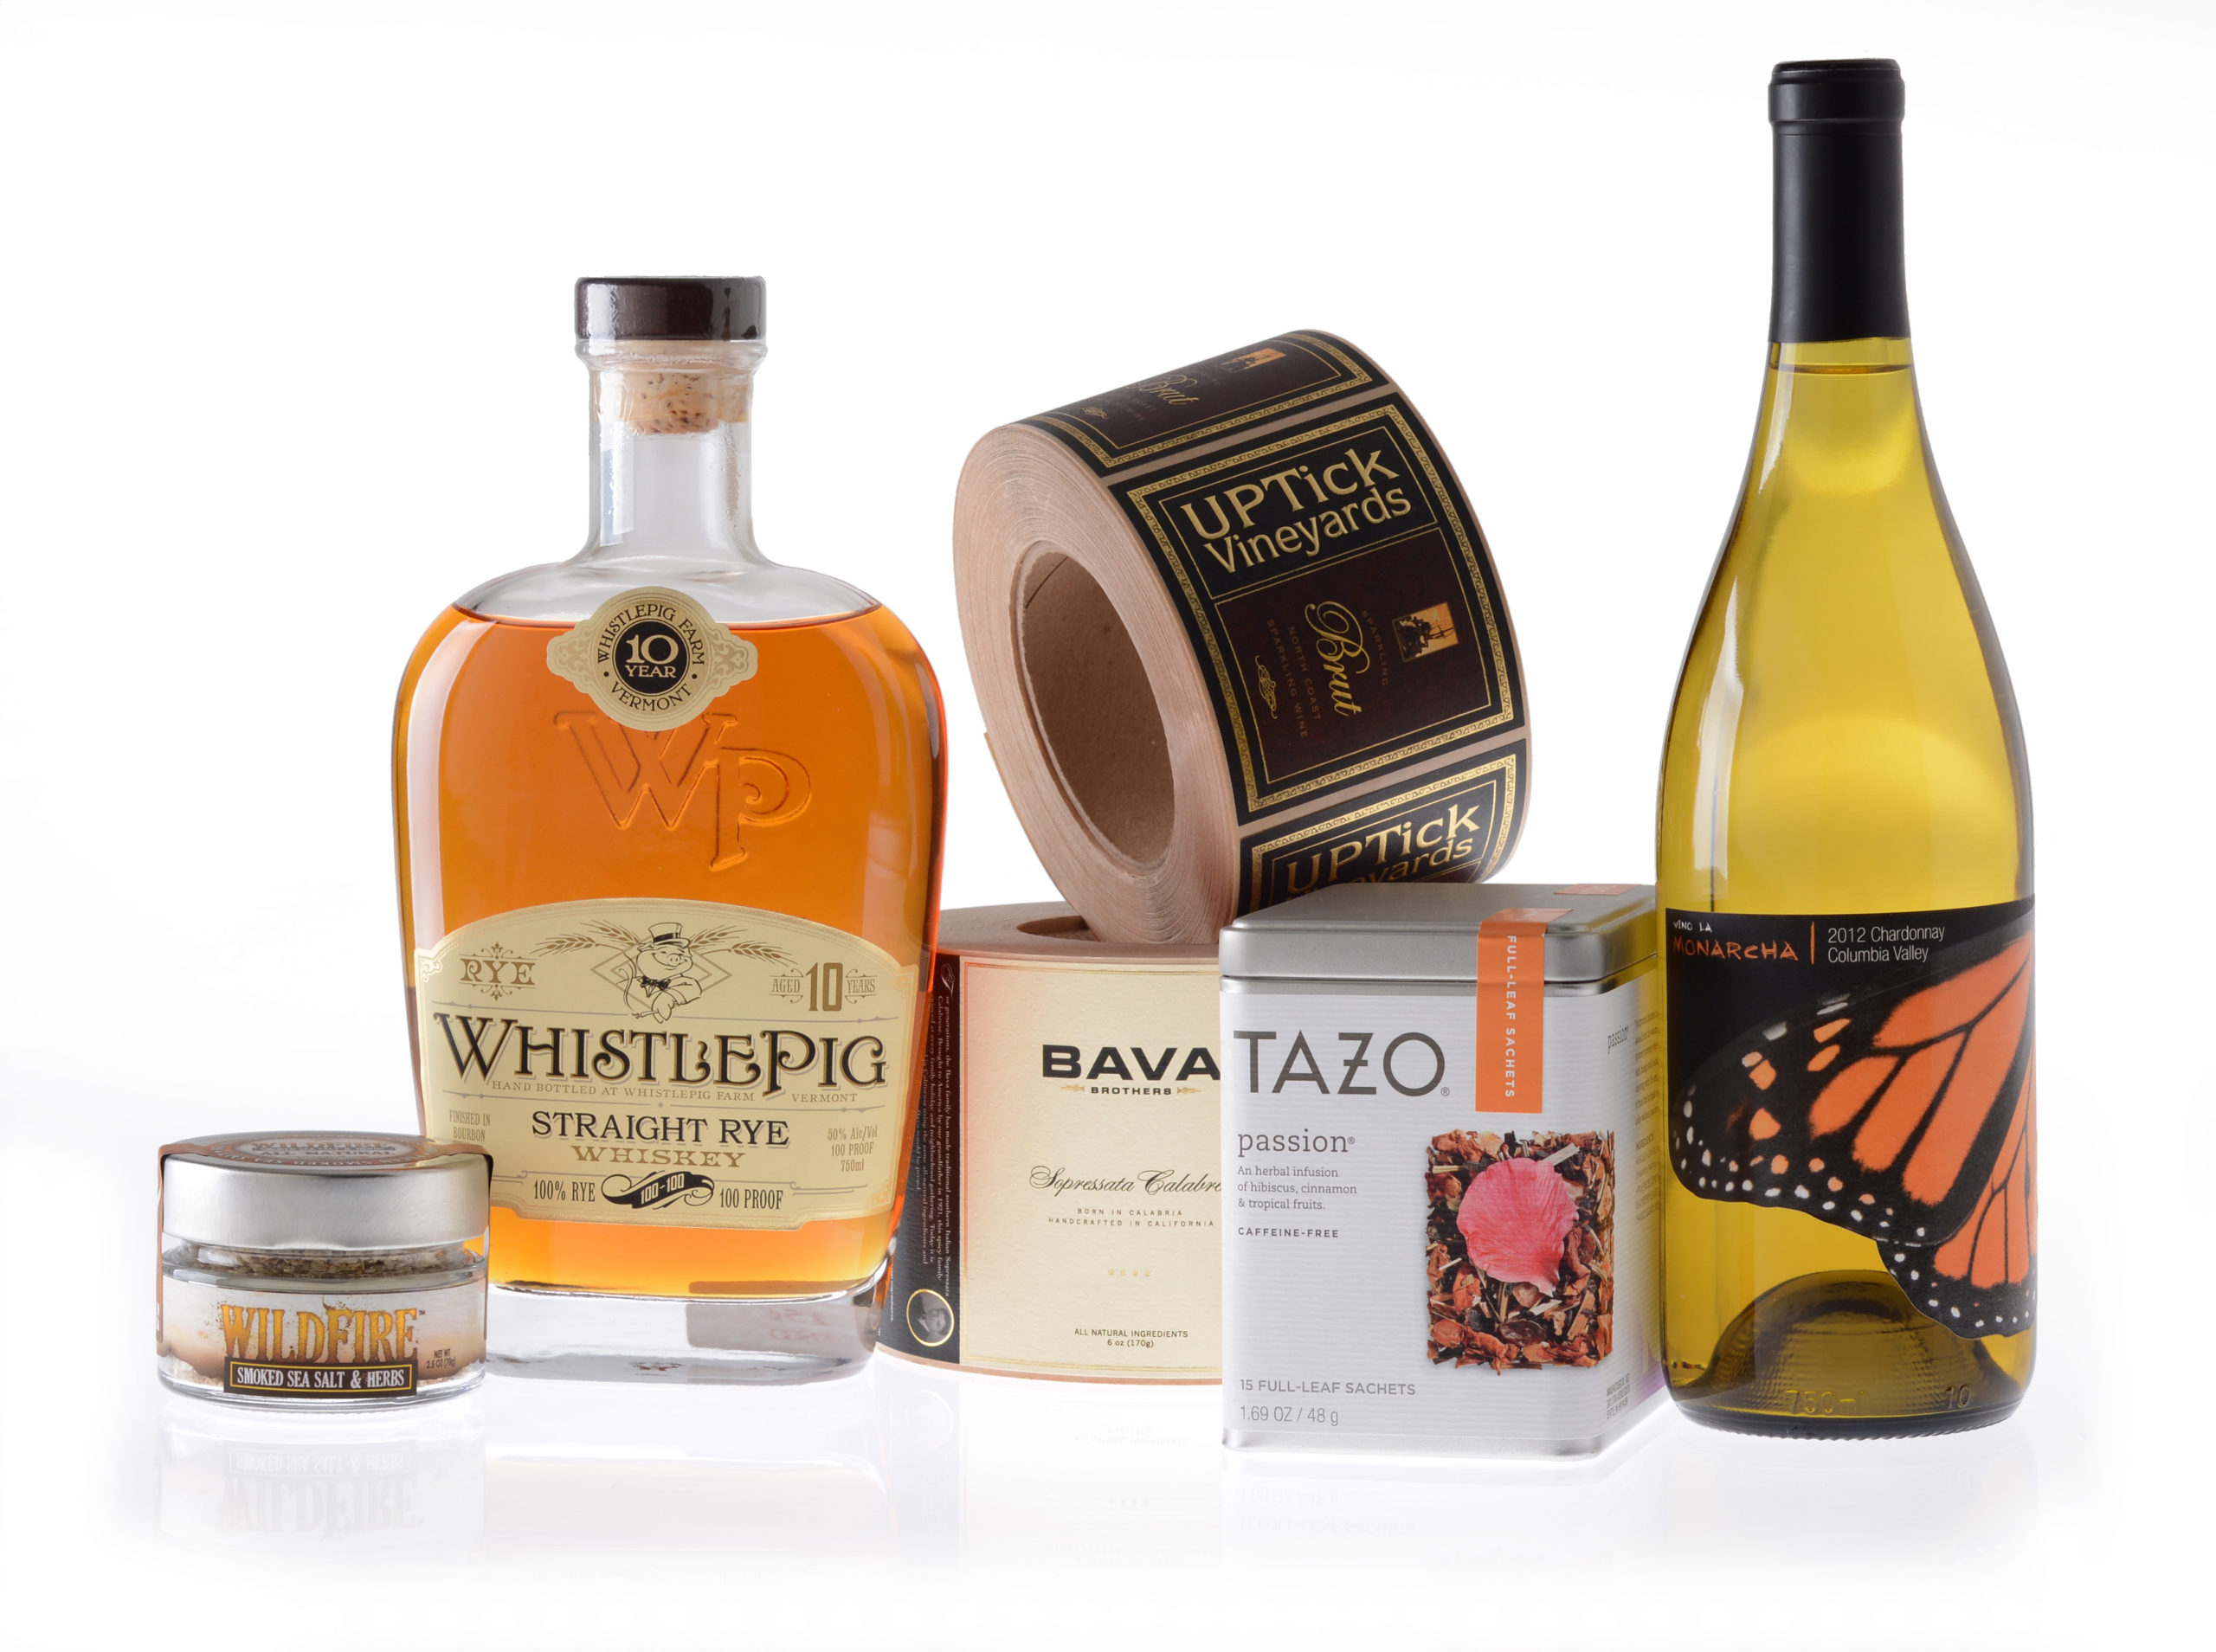 Wine & Spirits, Food and beverage products with labels